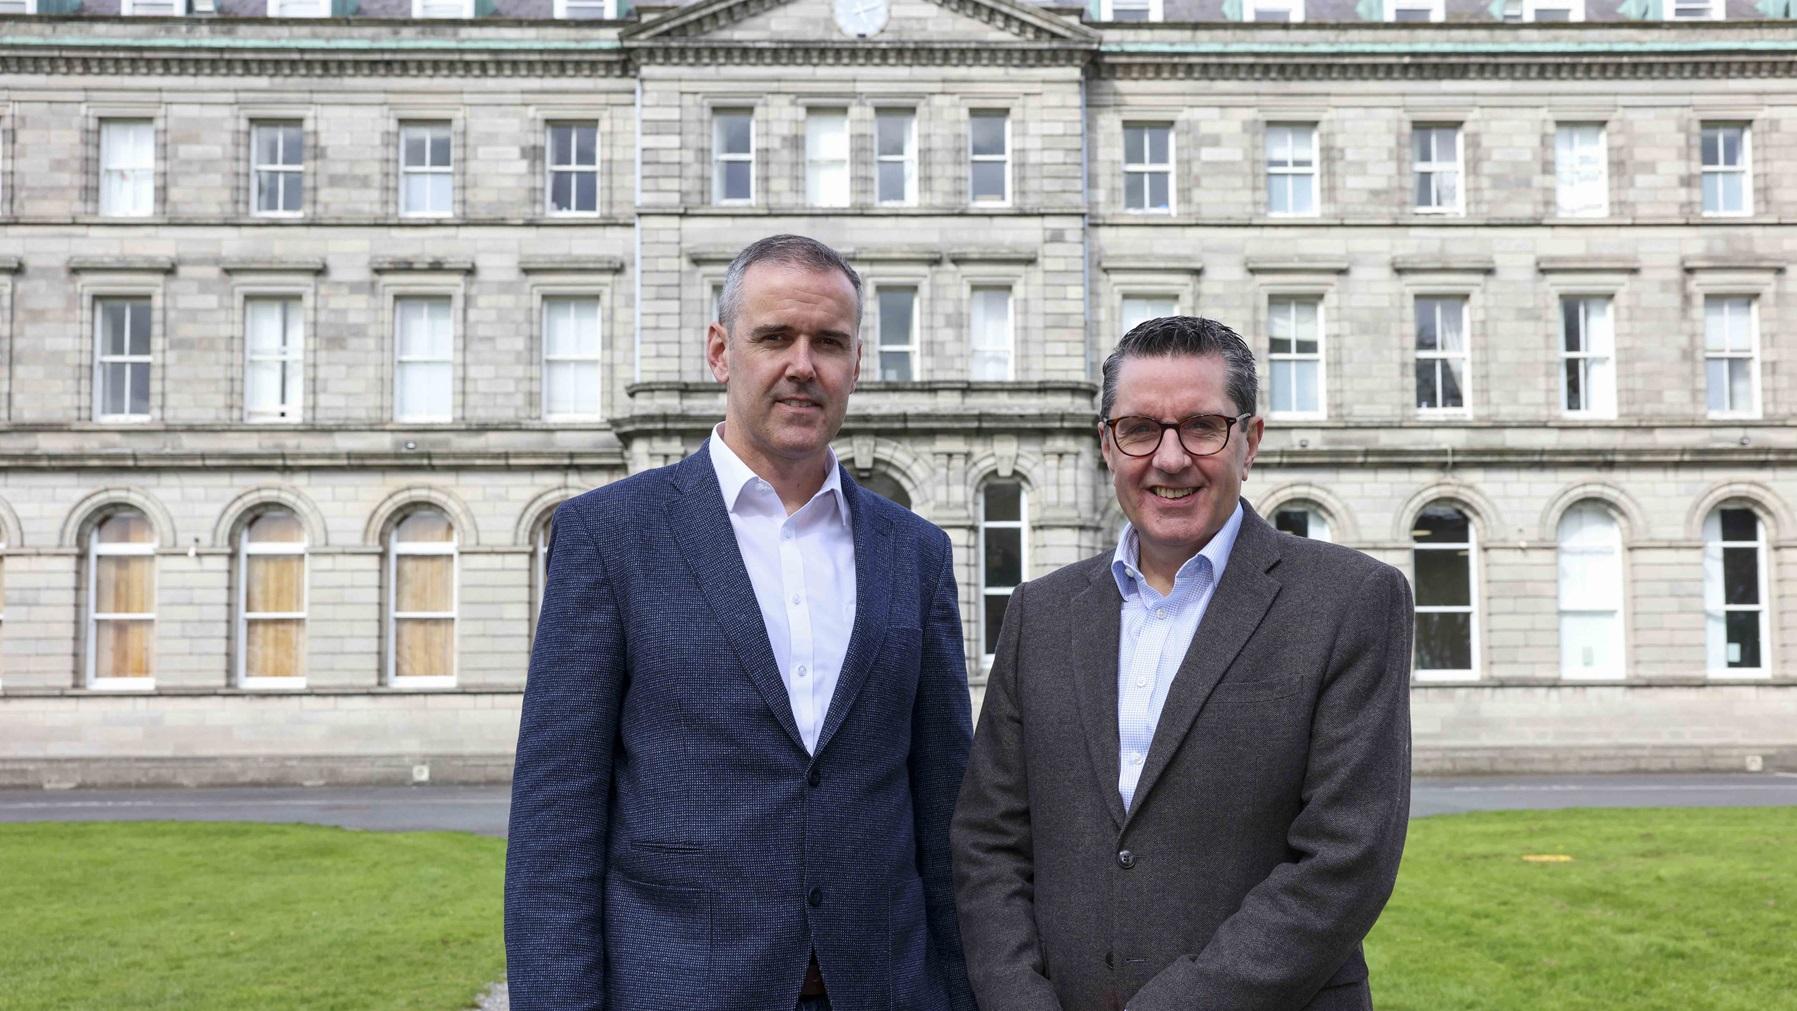 Peter Lantry, Equinix’s Managing Director for Ireland, and Prof James O’Higgins Norman, Director of DCU Anti-Bullying Centre and UNESCO Chair in Bullying and Cyberbullying